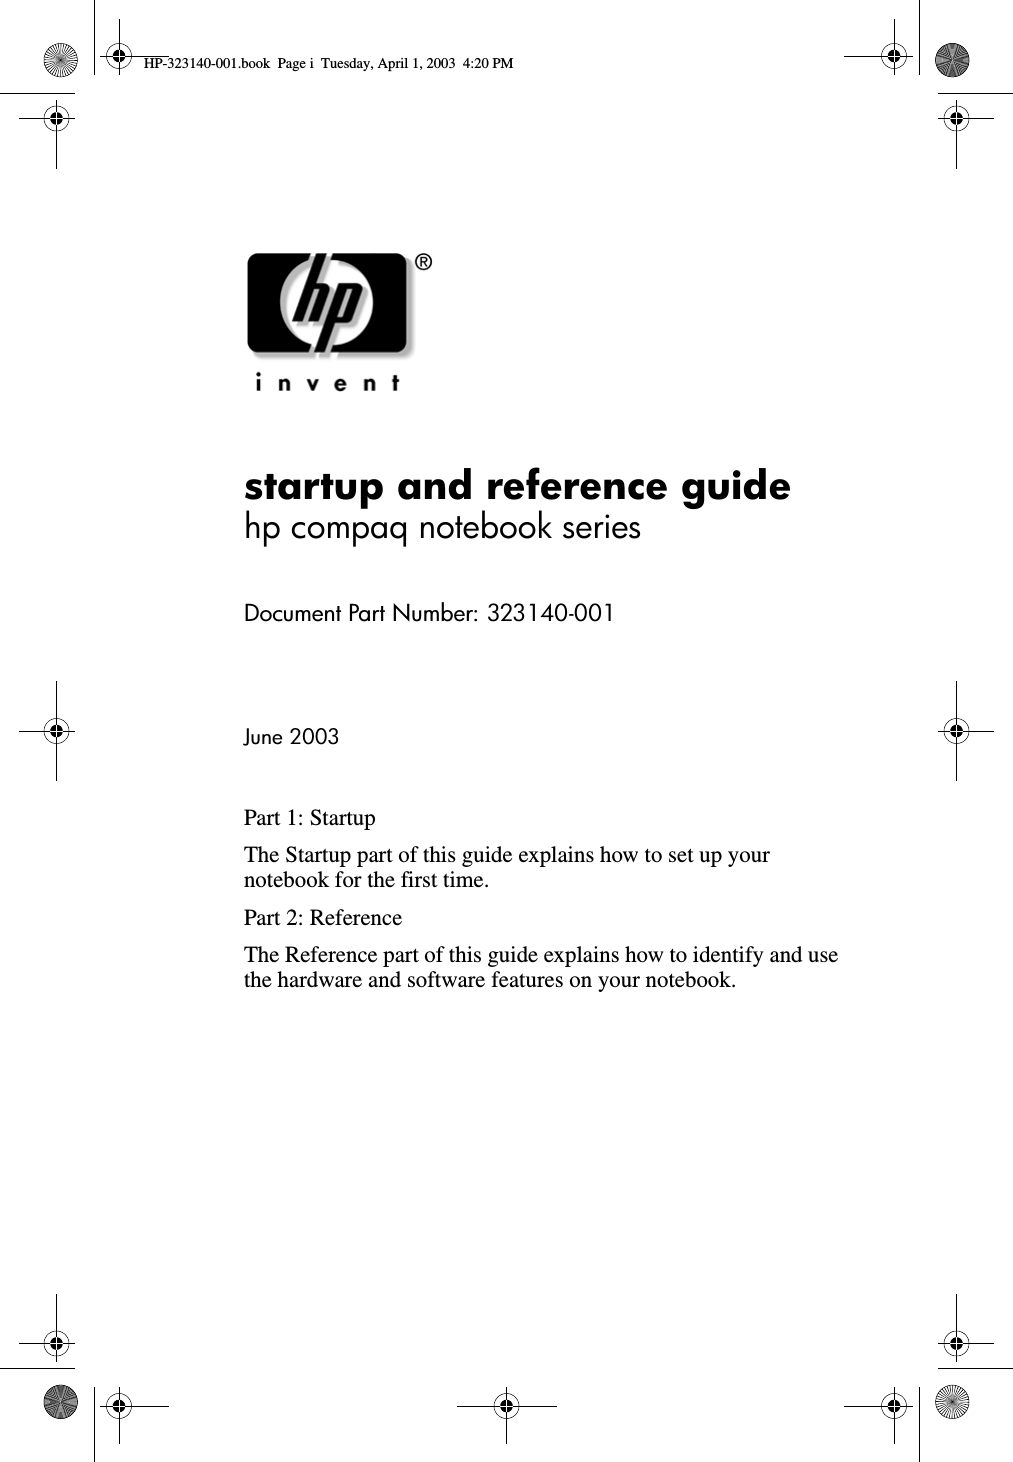 startup and reference guidehp compaq notebook seriesDocument Part Number: 323140-001June 2003Part 1: StartupThe Startup part of this guide explains how to set up your notebook for the first time.Part 2: ReferenceThe Reference part of this guide explains how to identify and use the hardware and software features on your notebook.HP-323140-001.book  Page i  Tuesday, April 1, 2003  4:20 PM